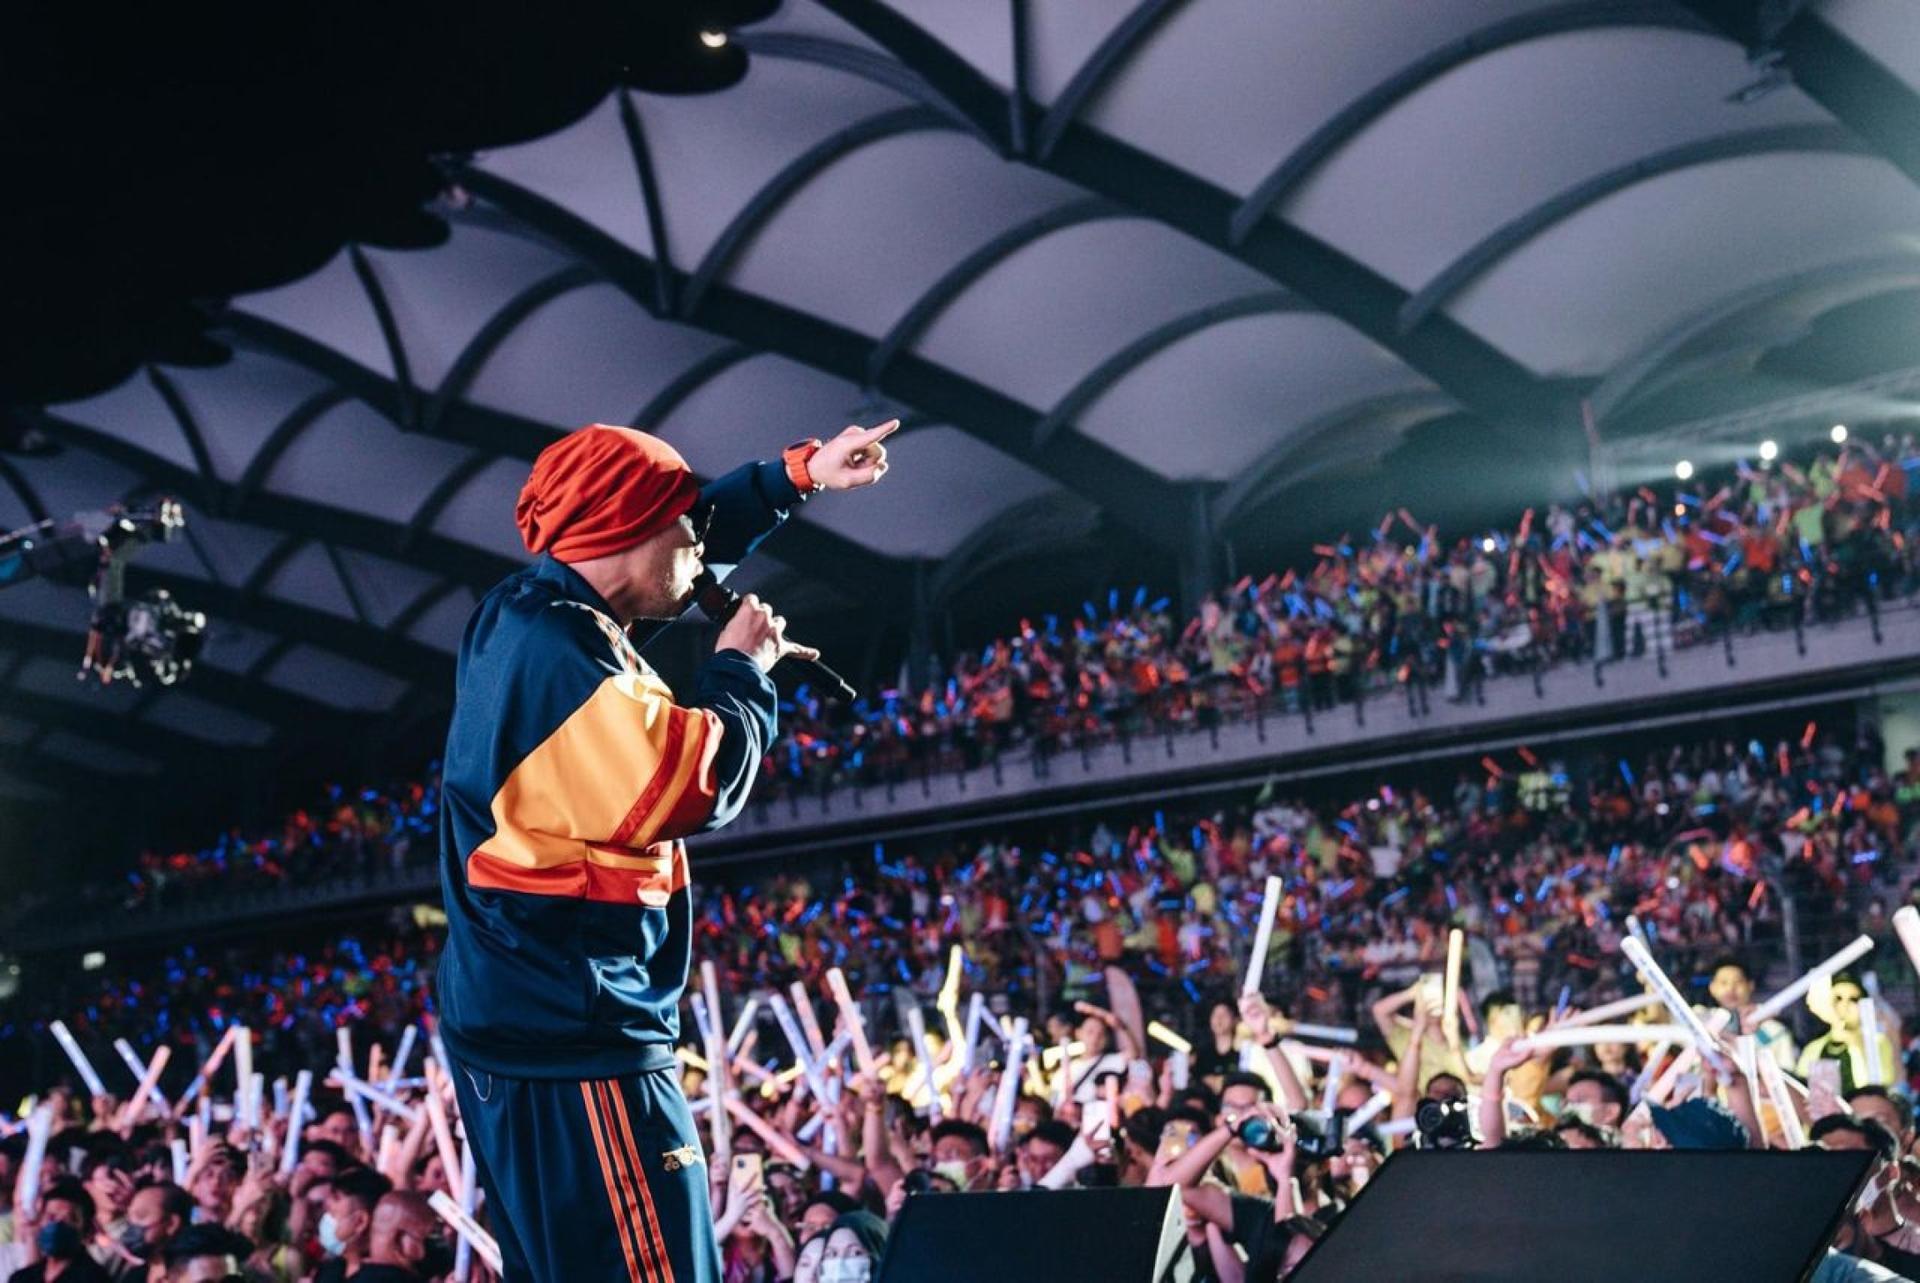 Namewee performs in front of his fans.